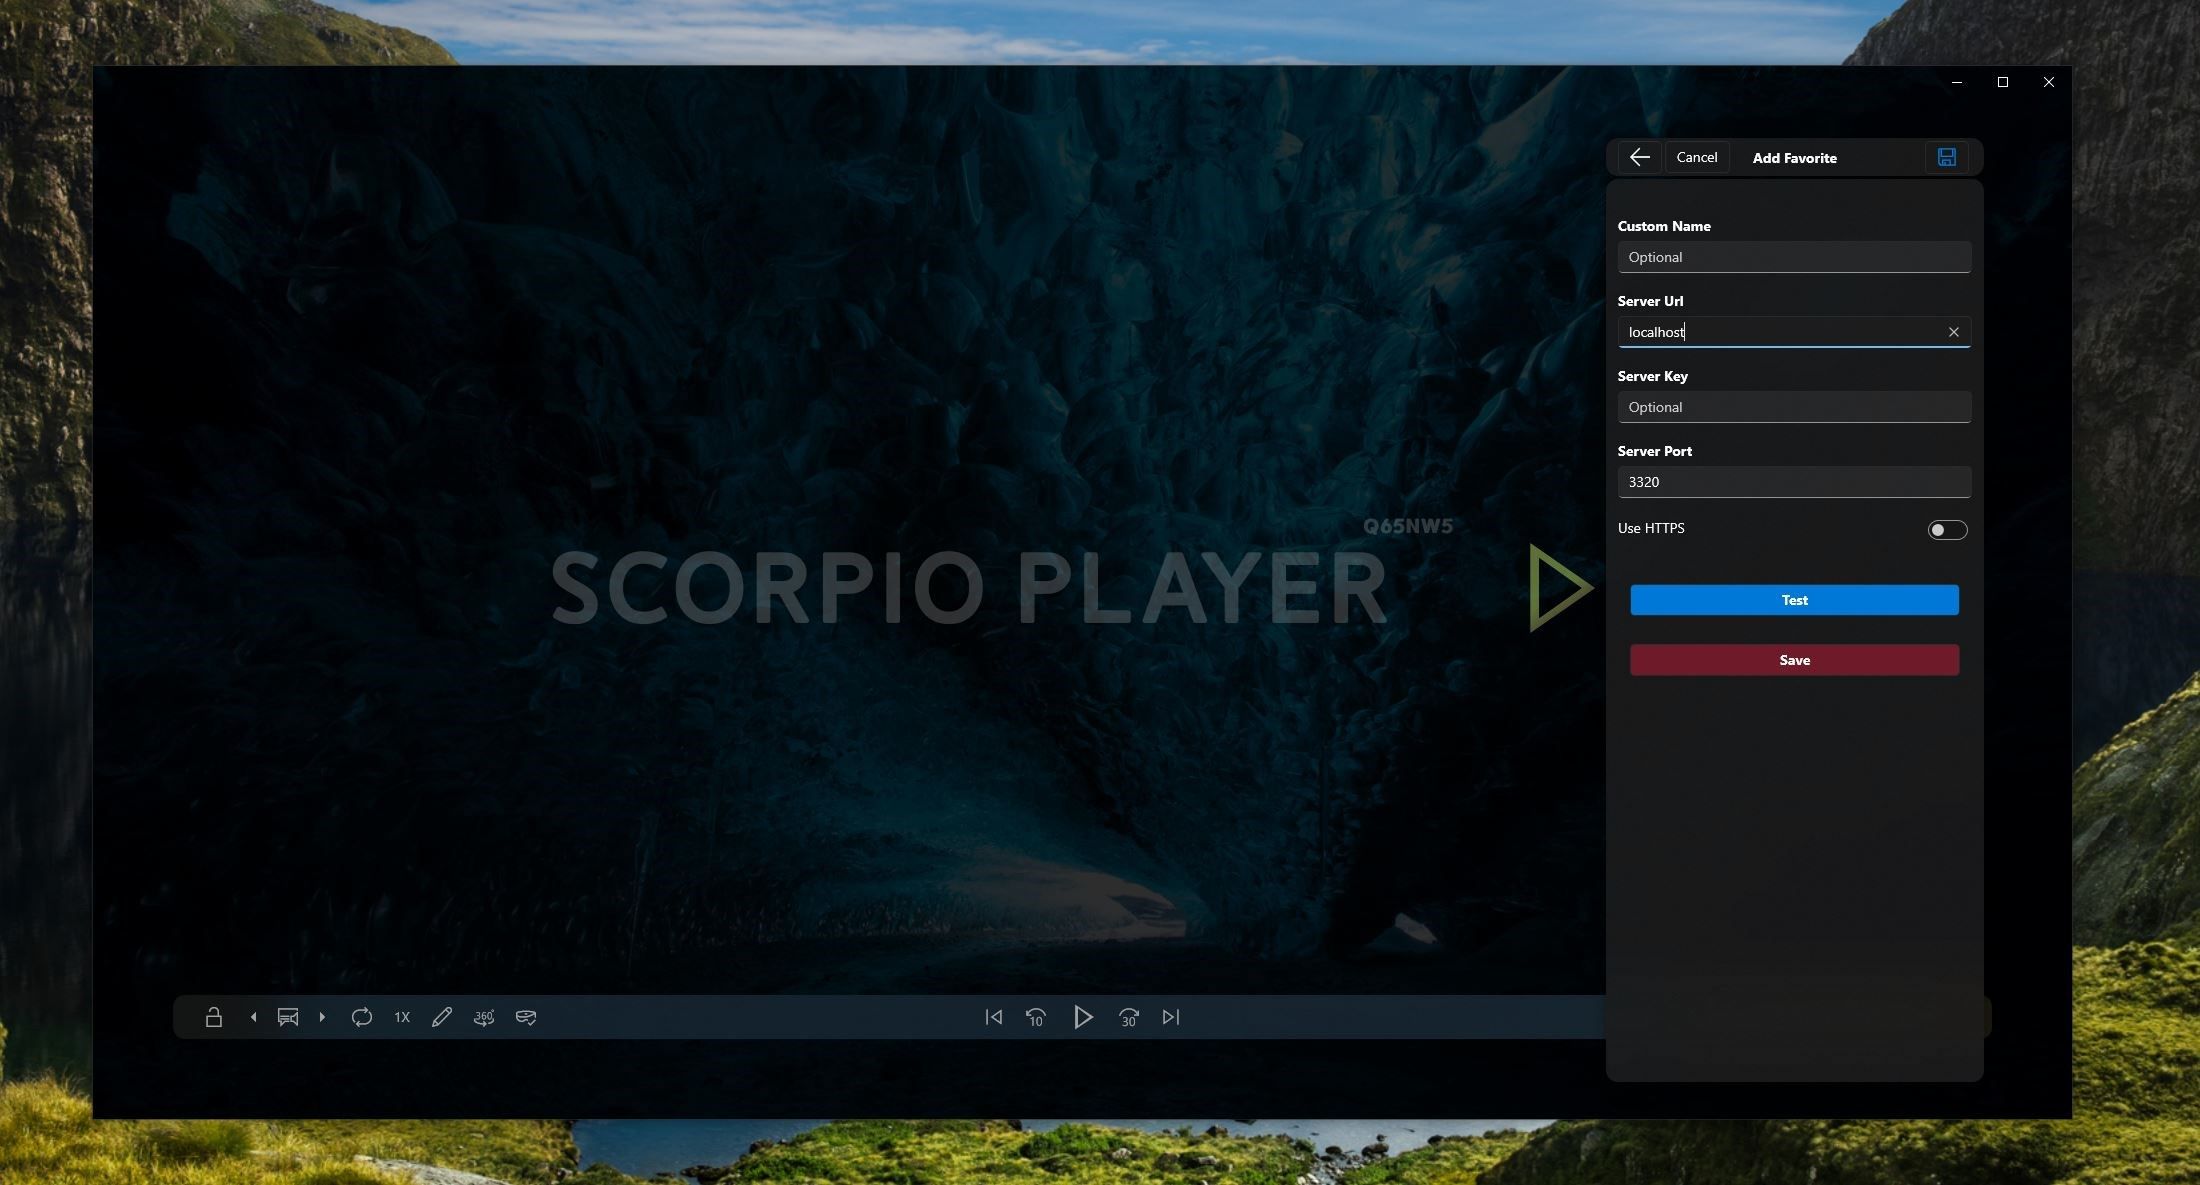 Scorpio Player as Client